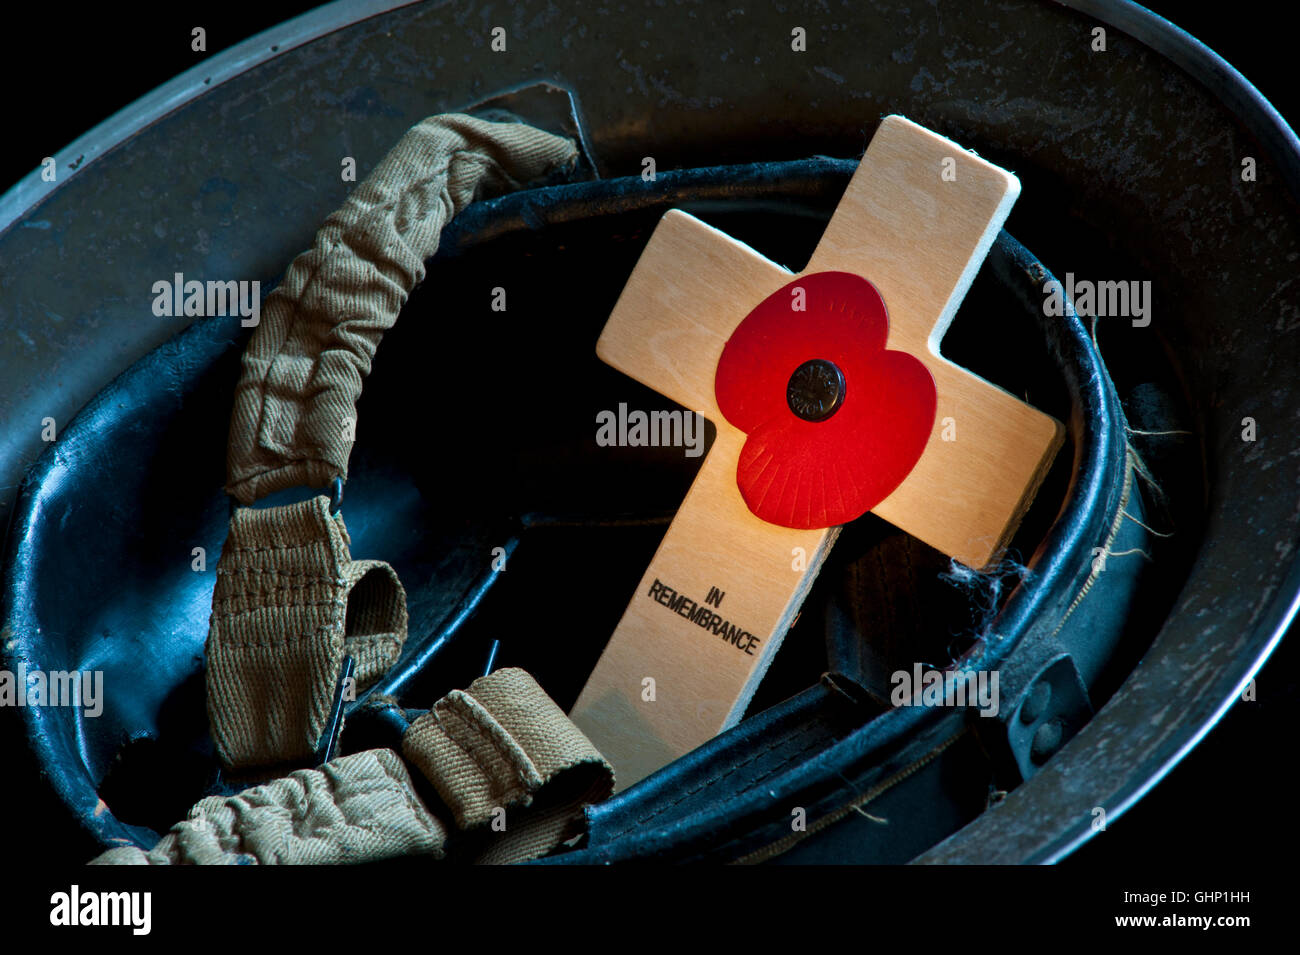 REMEMBRANCE POPPY CROSS Evocative study of WW2 original 1939 army soldier tommy military helmet with Remembrance Day poppy cross UK Stock Photo